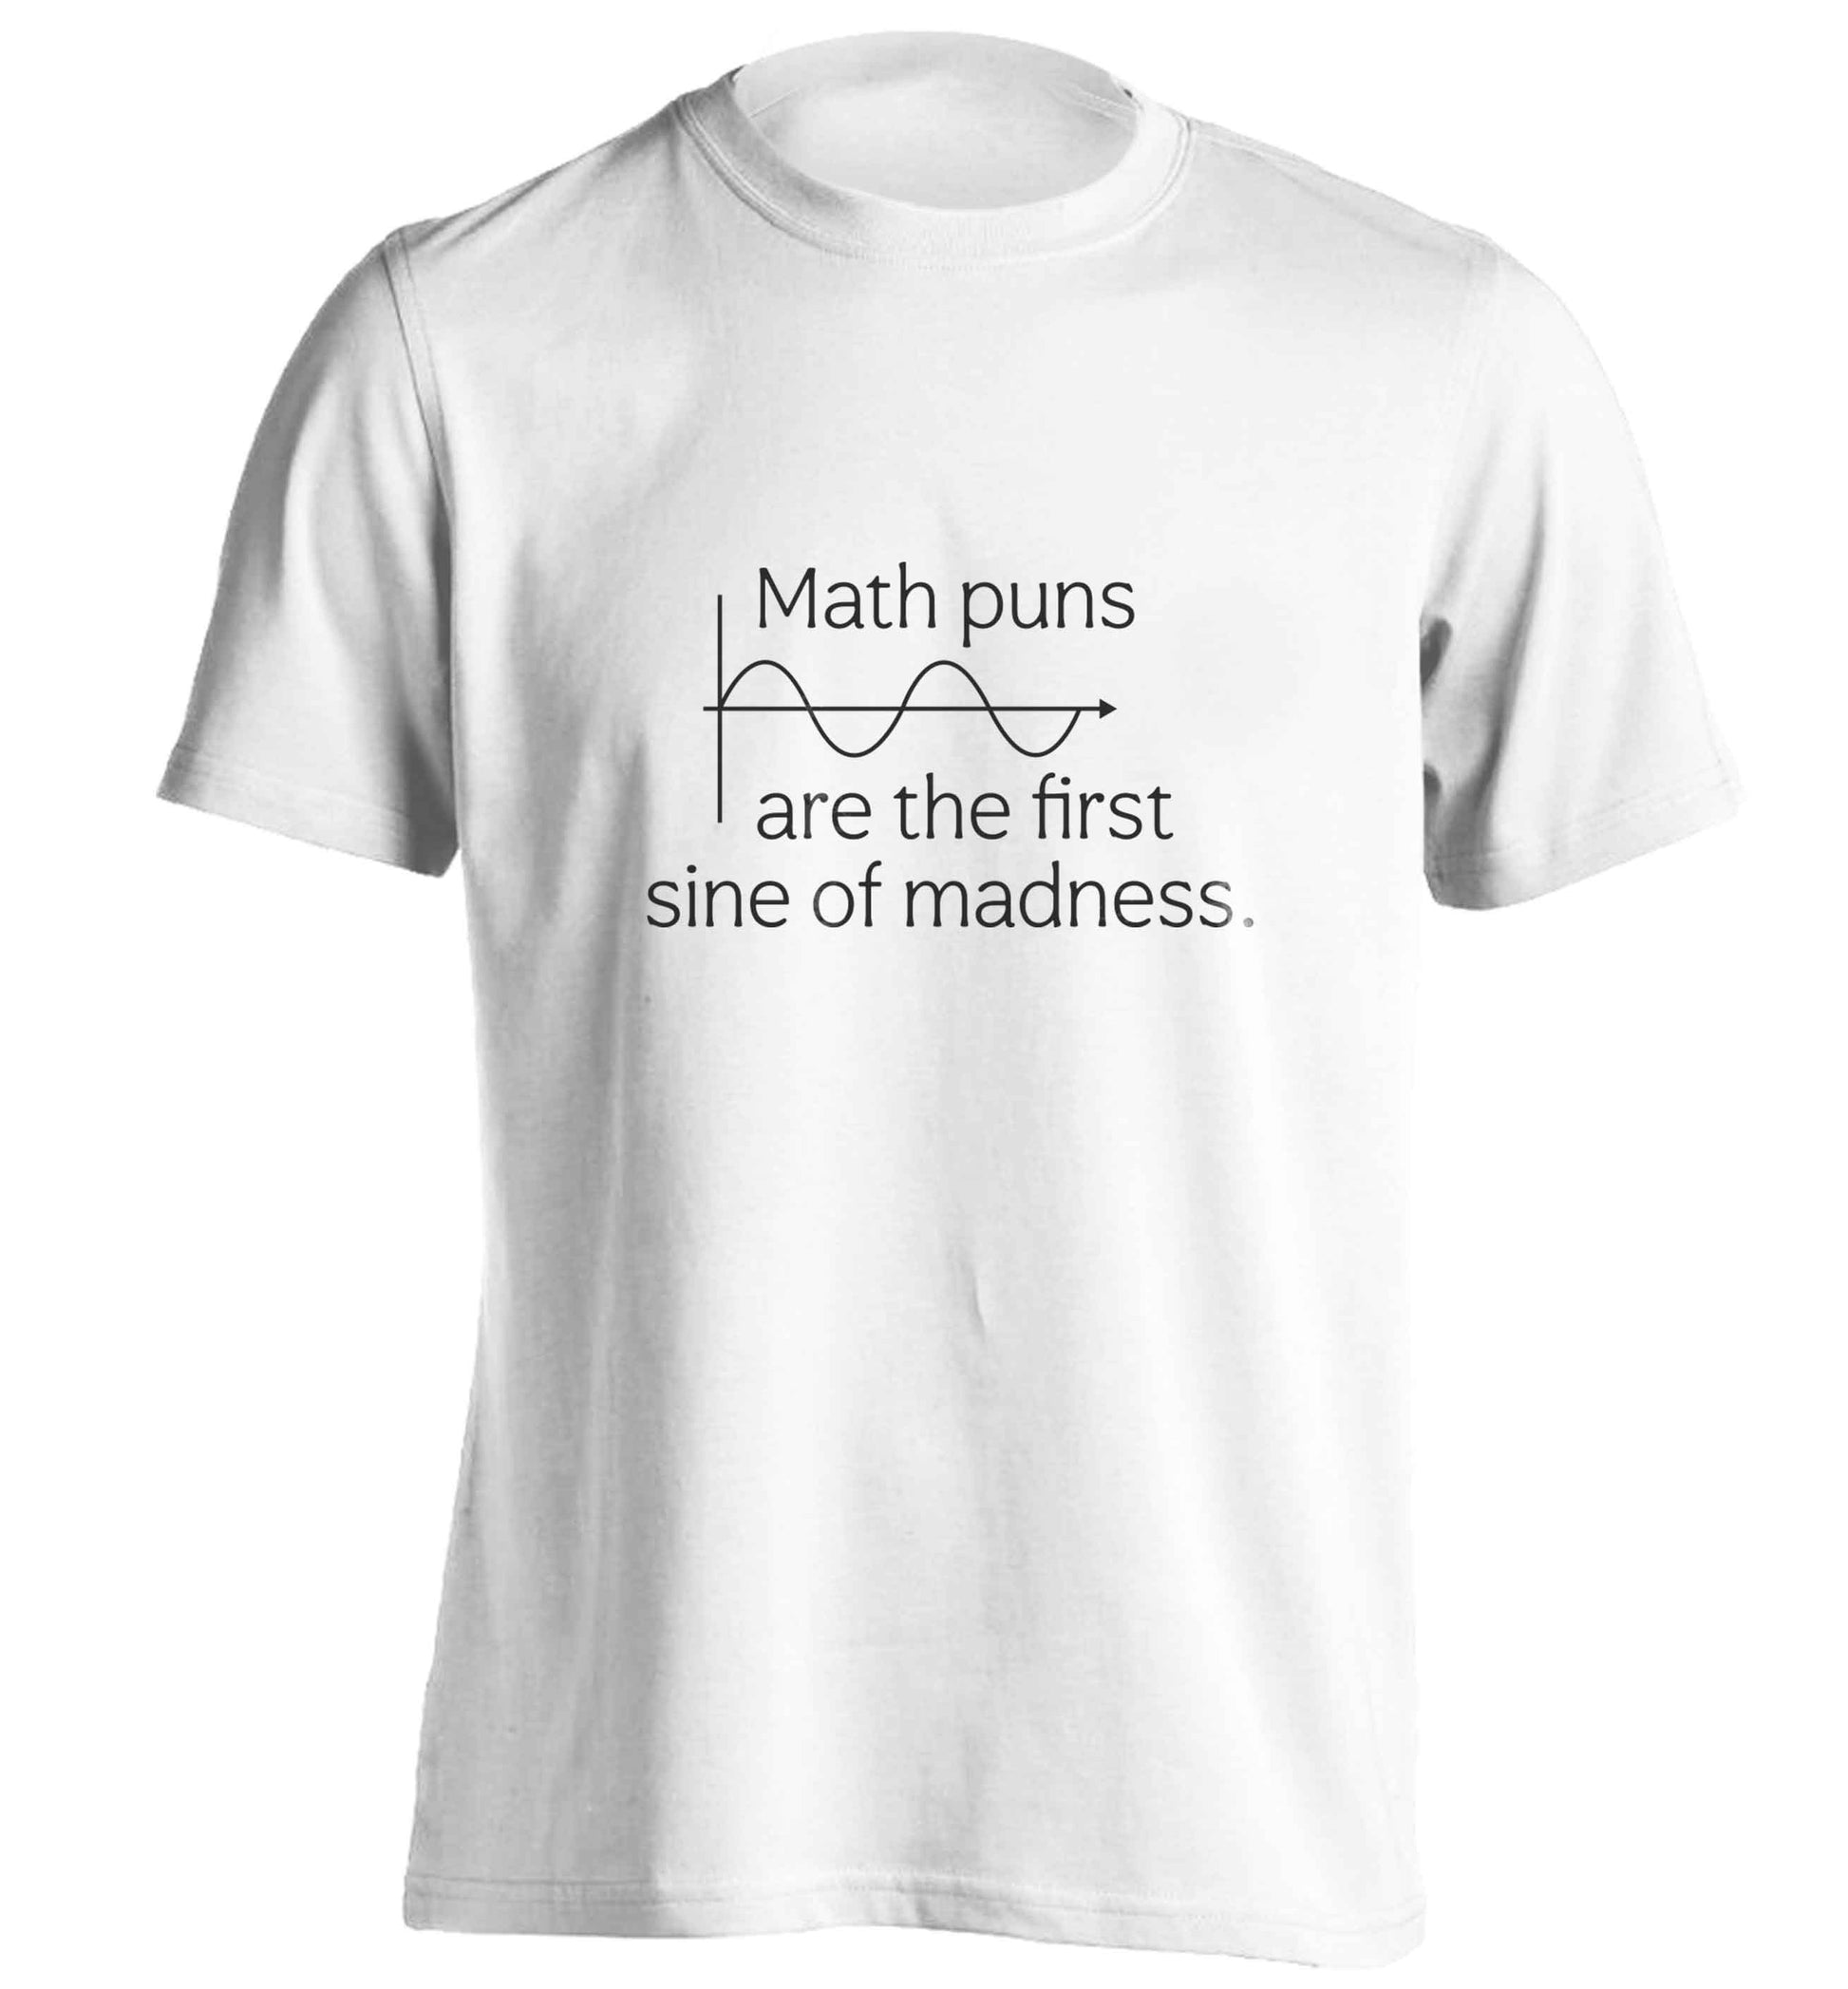 Math puns are the first sine of madness adults unisex white Tshirt 2XL